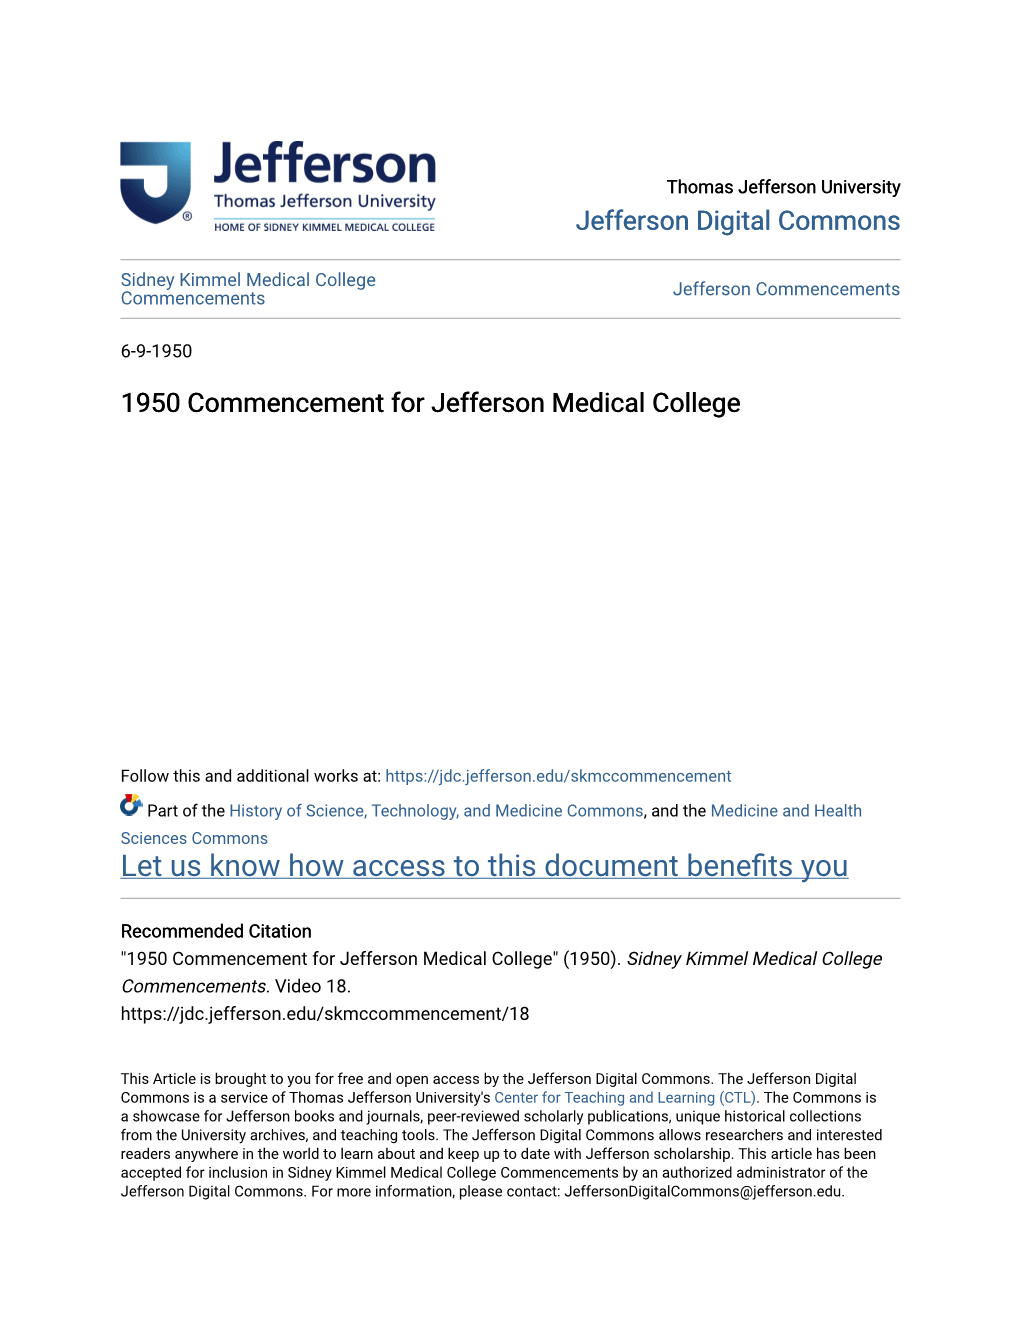 1950 Commencement for Jefferson Medical College